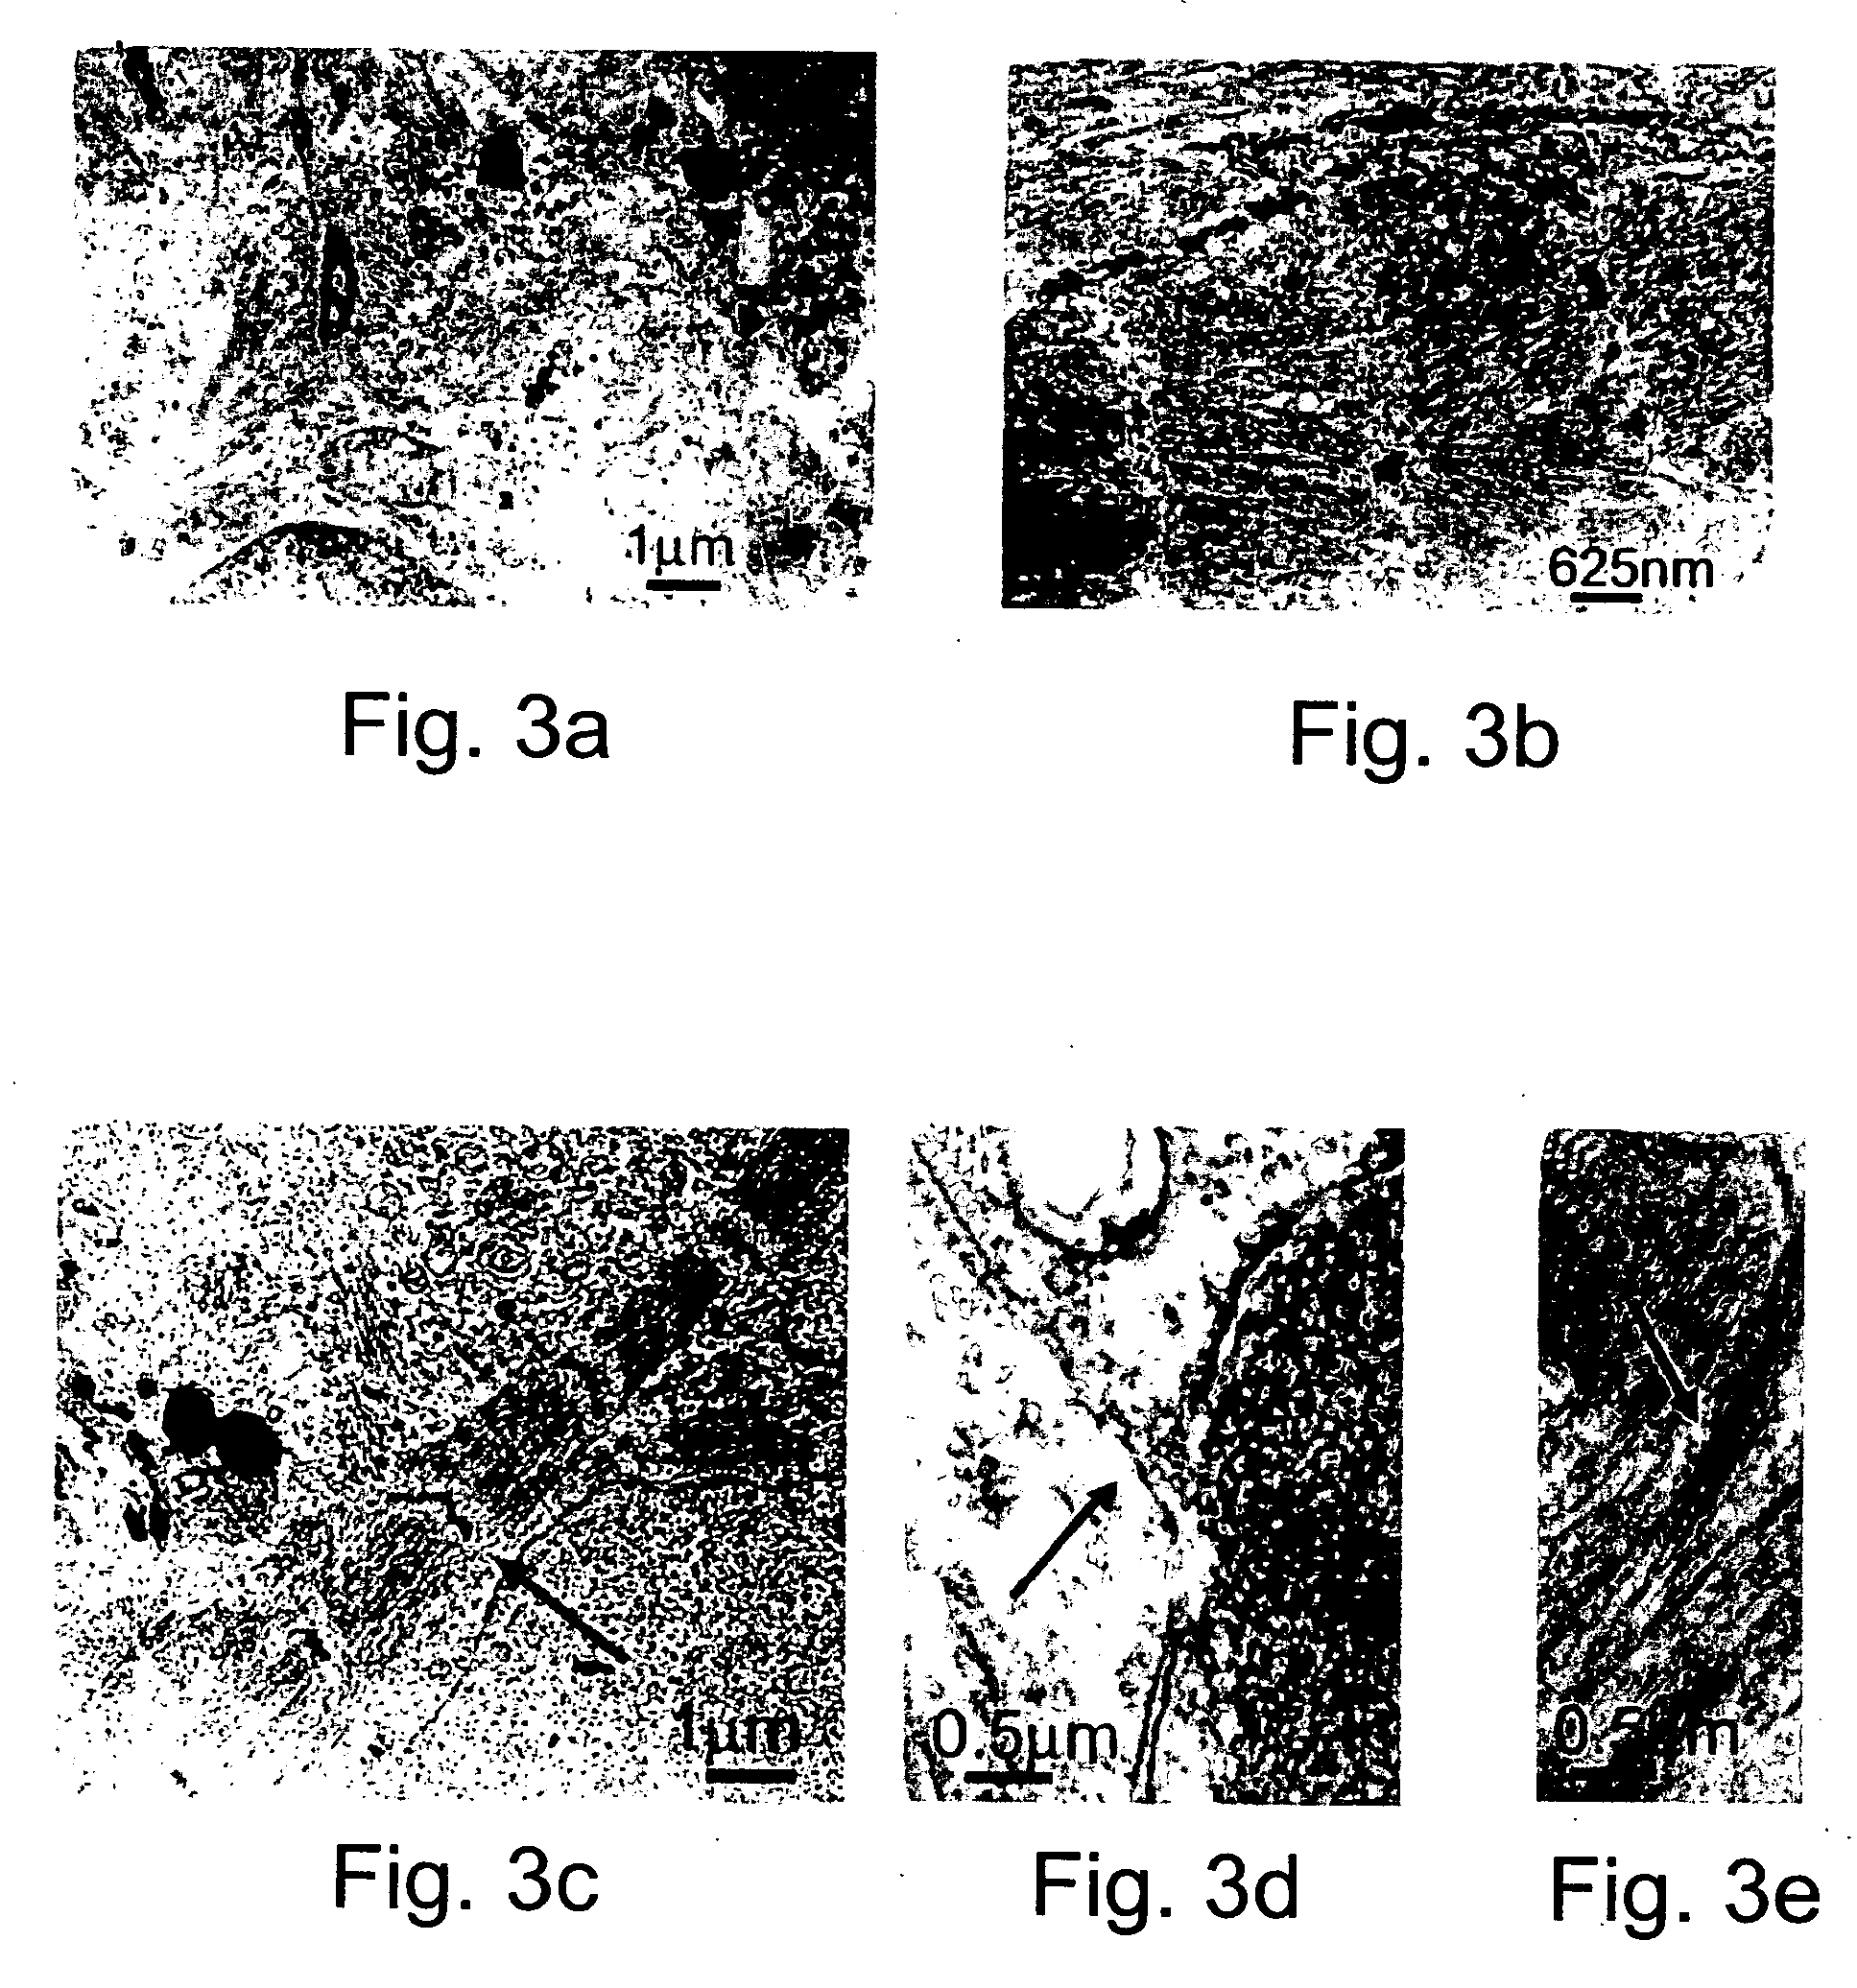 Methods of generating human cardiac cells and tissues and uses thereof